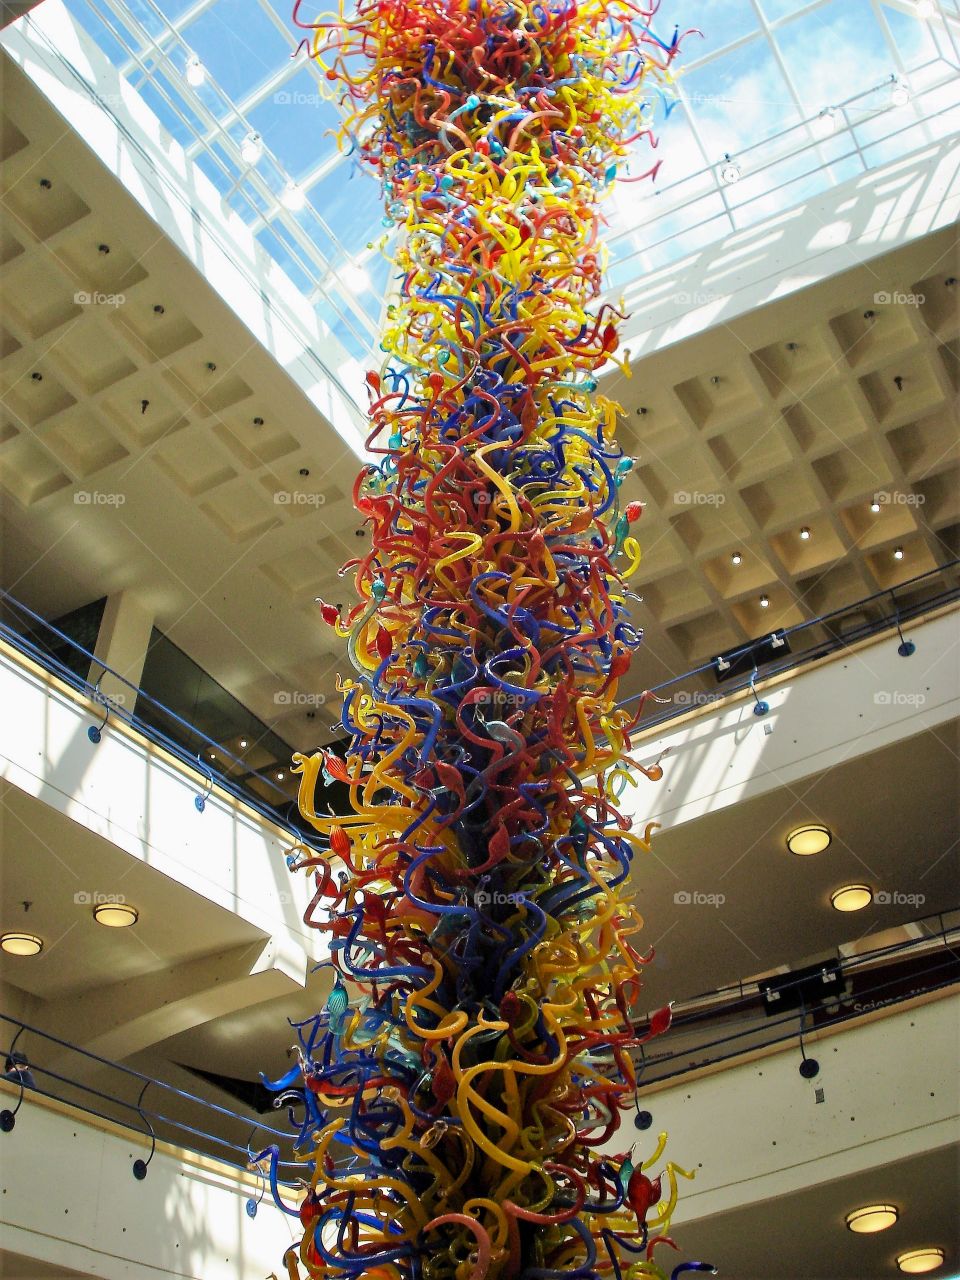 This breathtaking 43 foot tower is the Fireworks of Glass! The colossal blown glass tower is located at the Children’s Museum of Indianapolis 